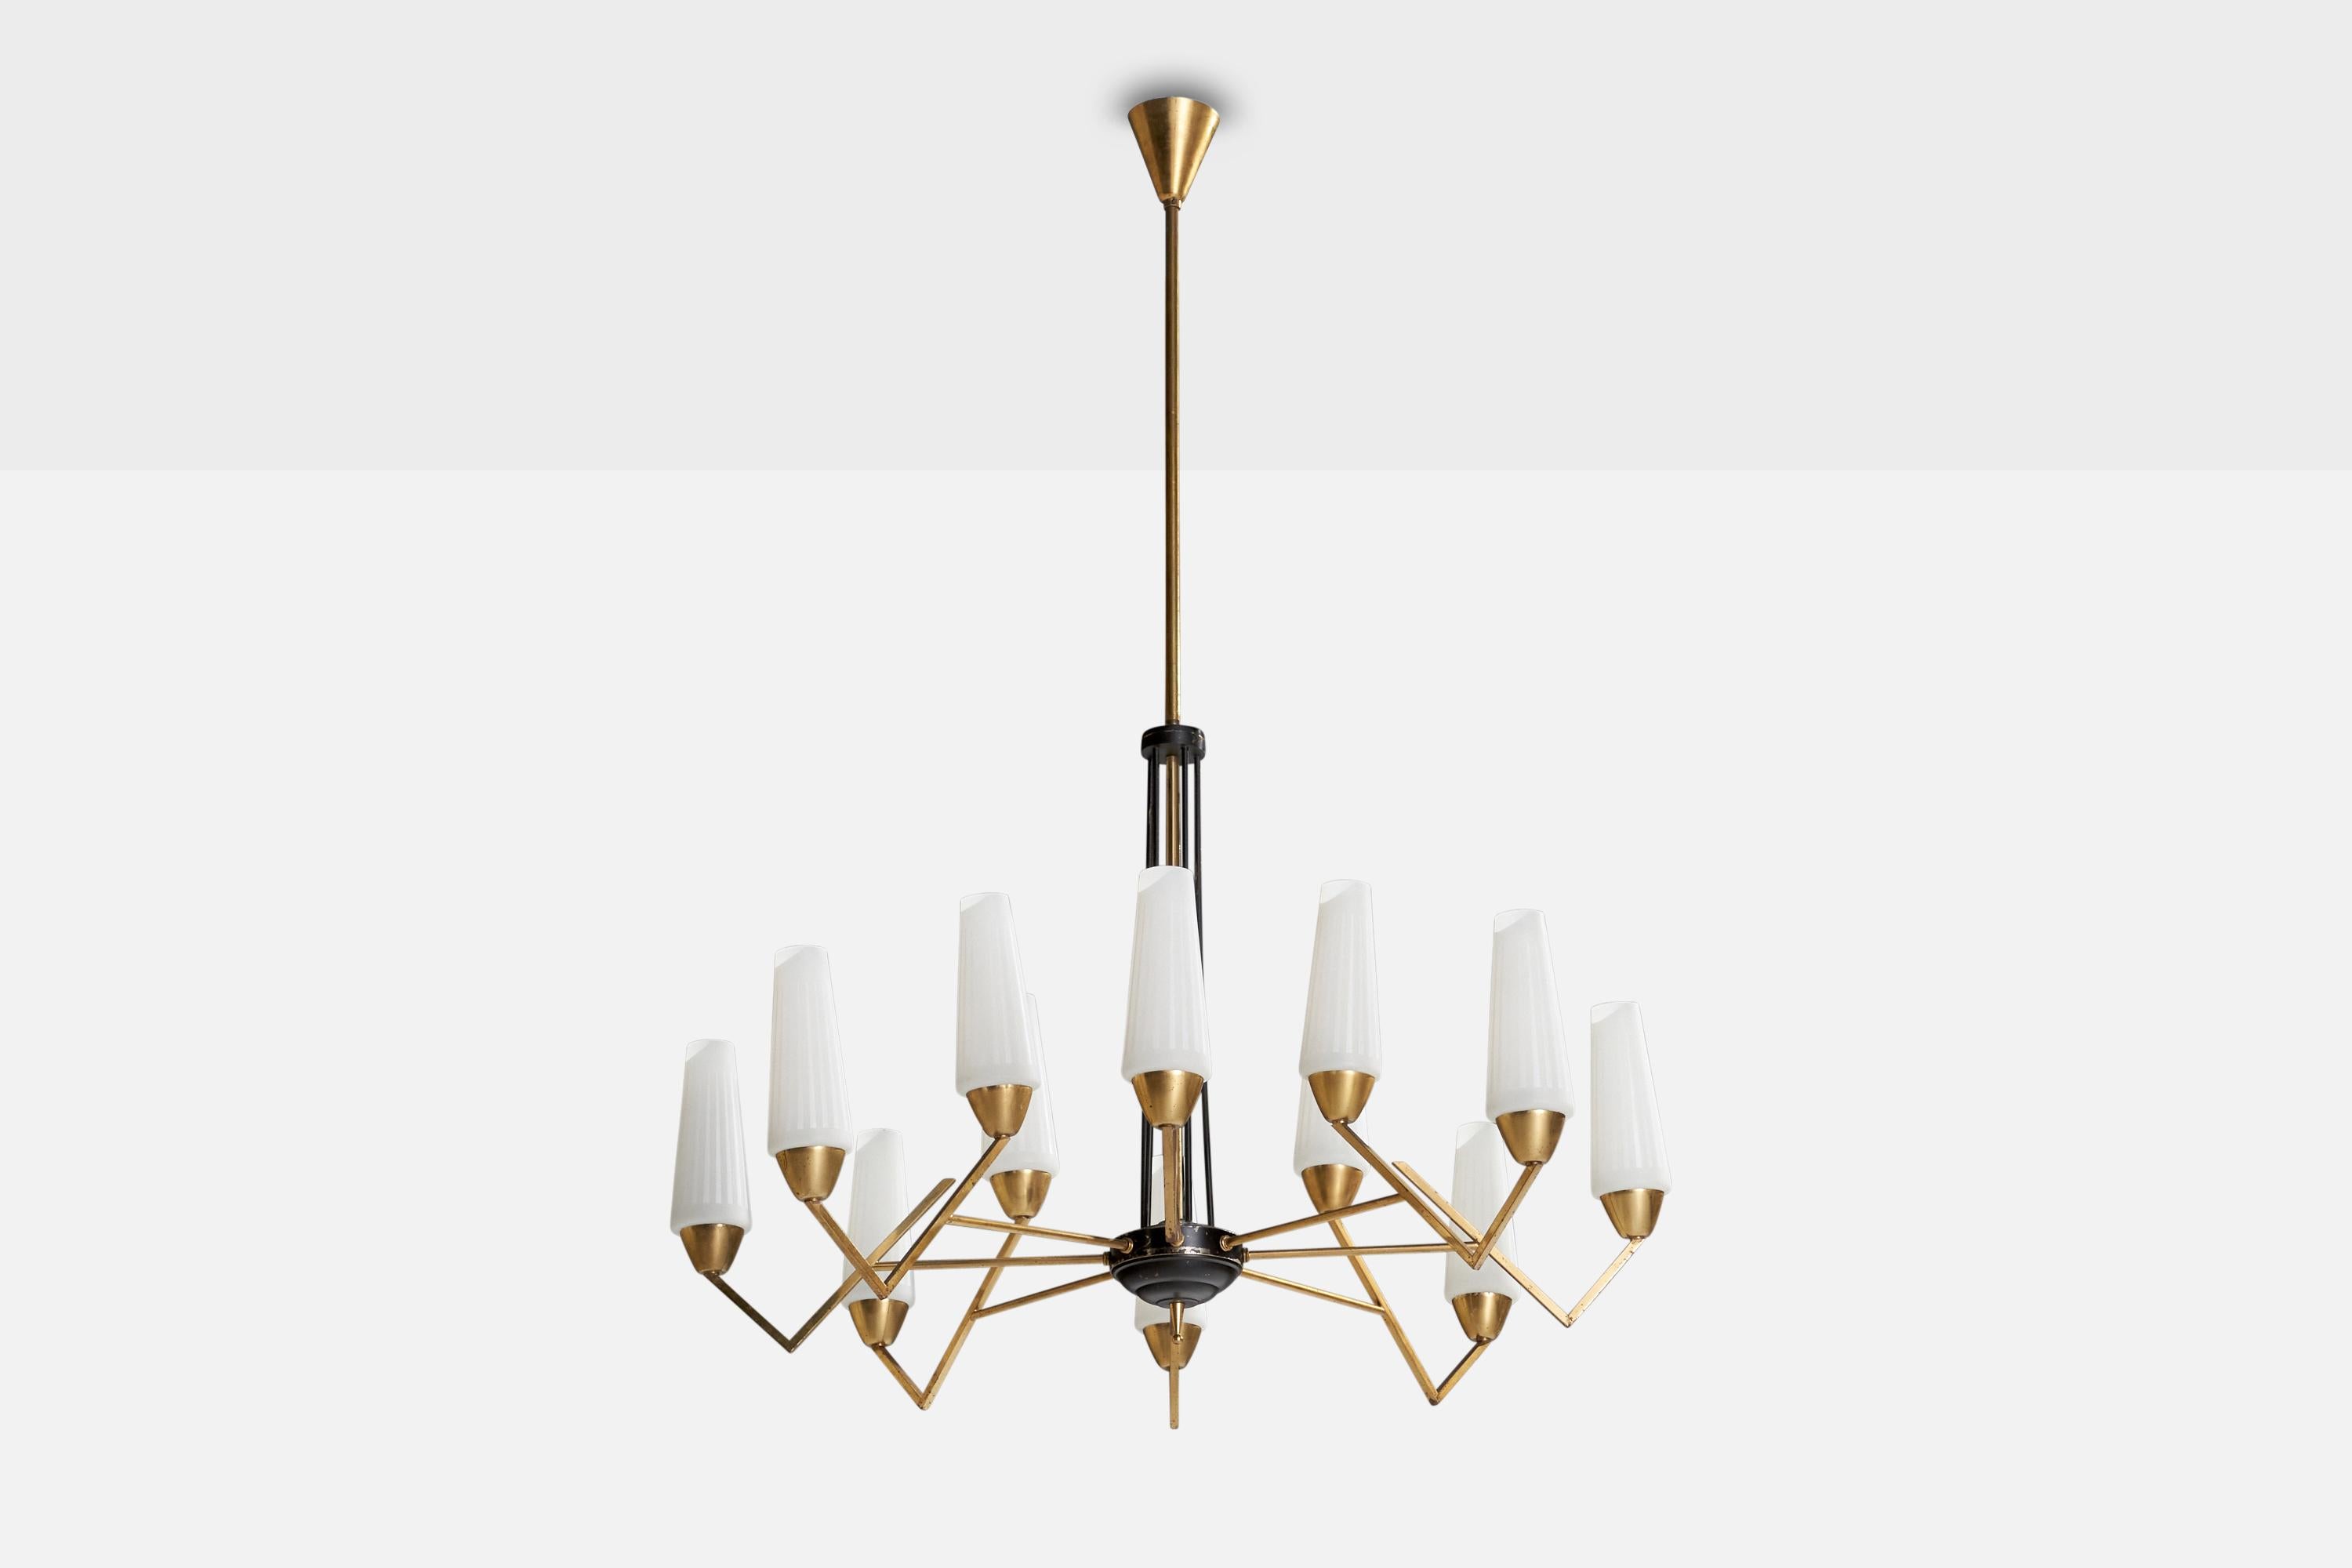 A brass, black-lacquered metal, opaline glass and brass chandelier designed and produced in Italy, 1950s.

Dimensions of canopy (inches): 3.75” H x 3.5” Diameter
Socket takes standard E-14 bulbs. 12 sockets.
There is no maximum wattage stated on the